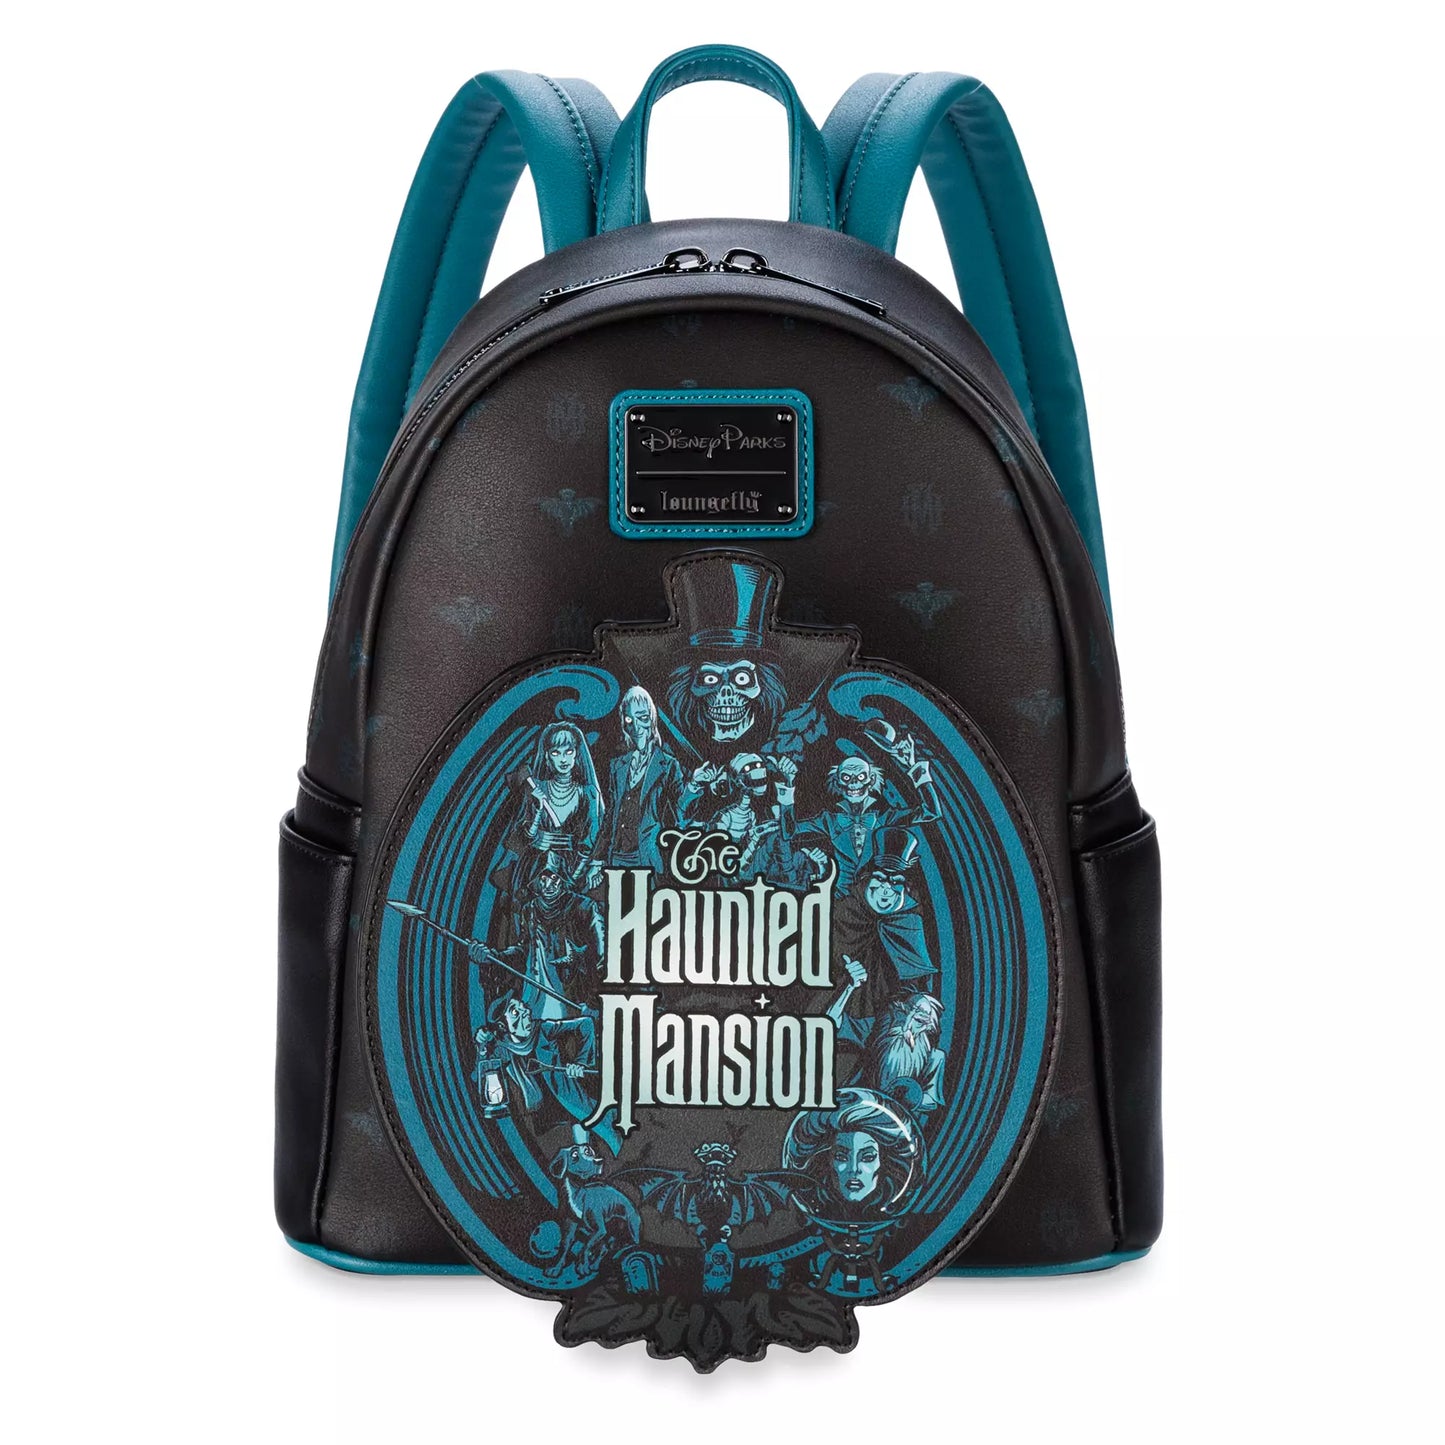 THE HAUNTED MANSION GLOW-IN-THE-DARK LOUNGEFLY MINI BACKPACK